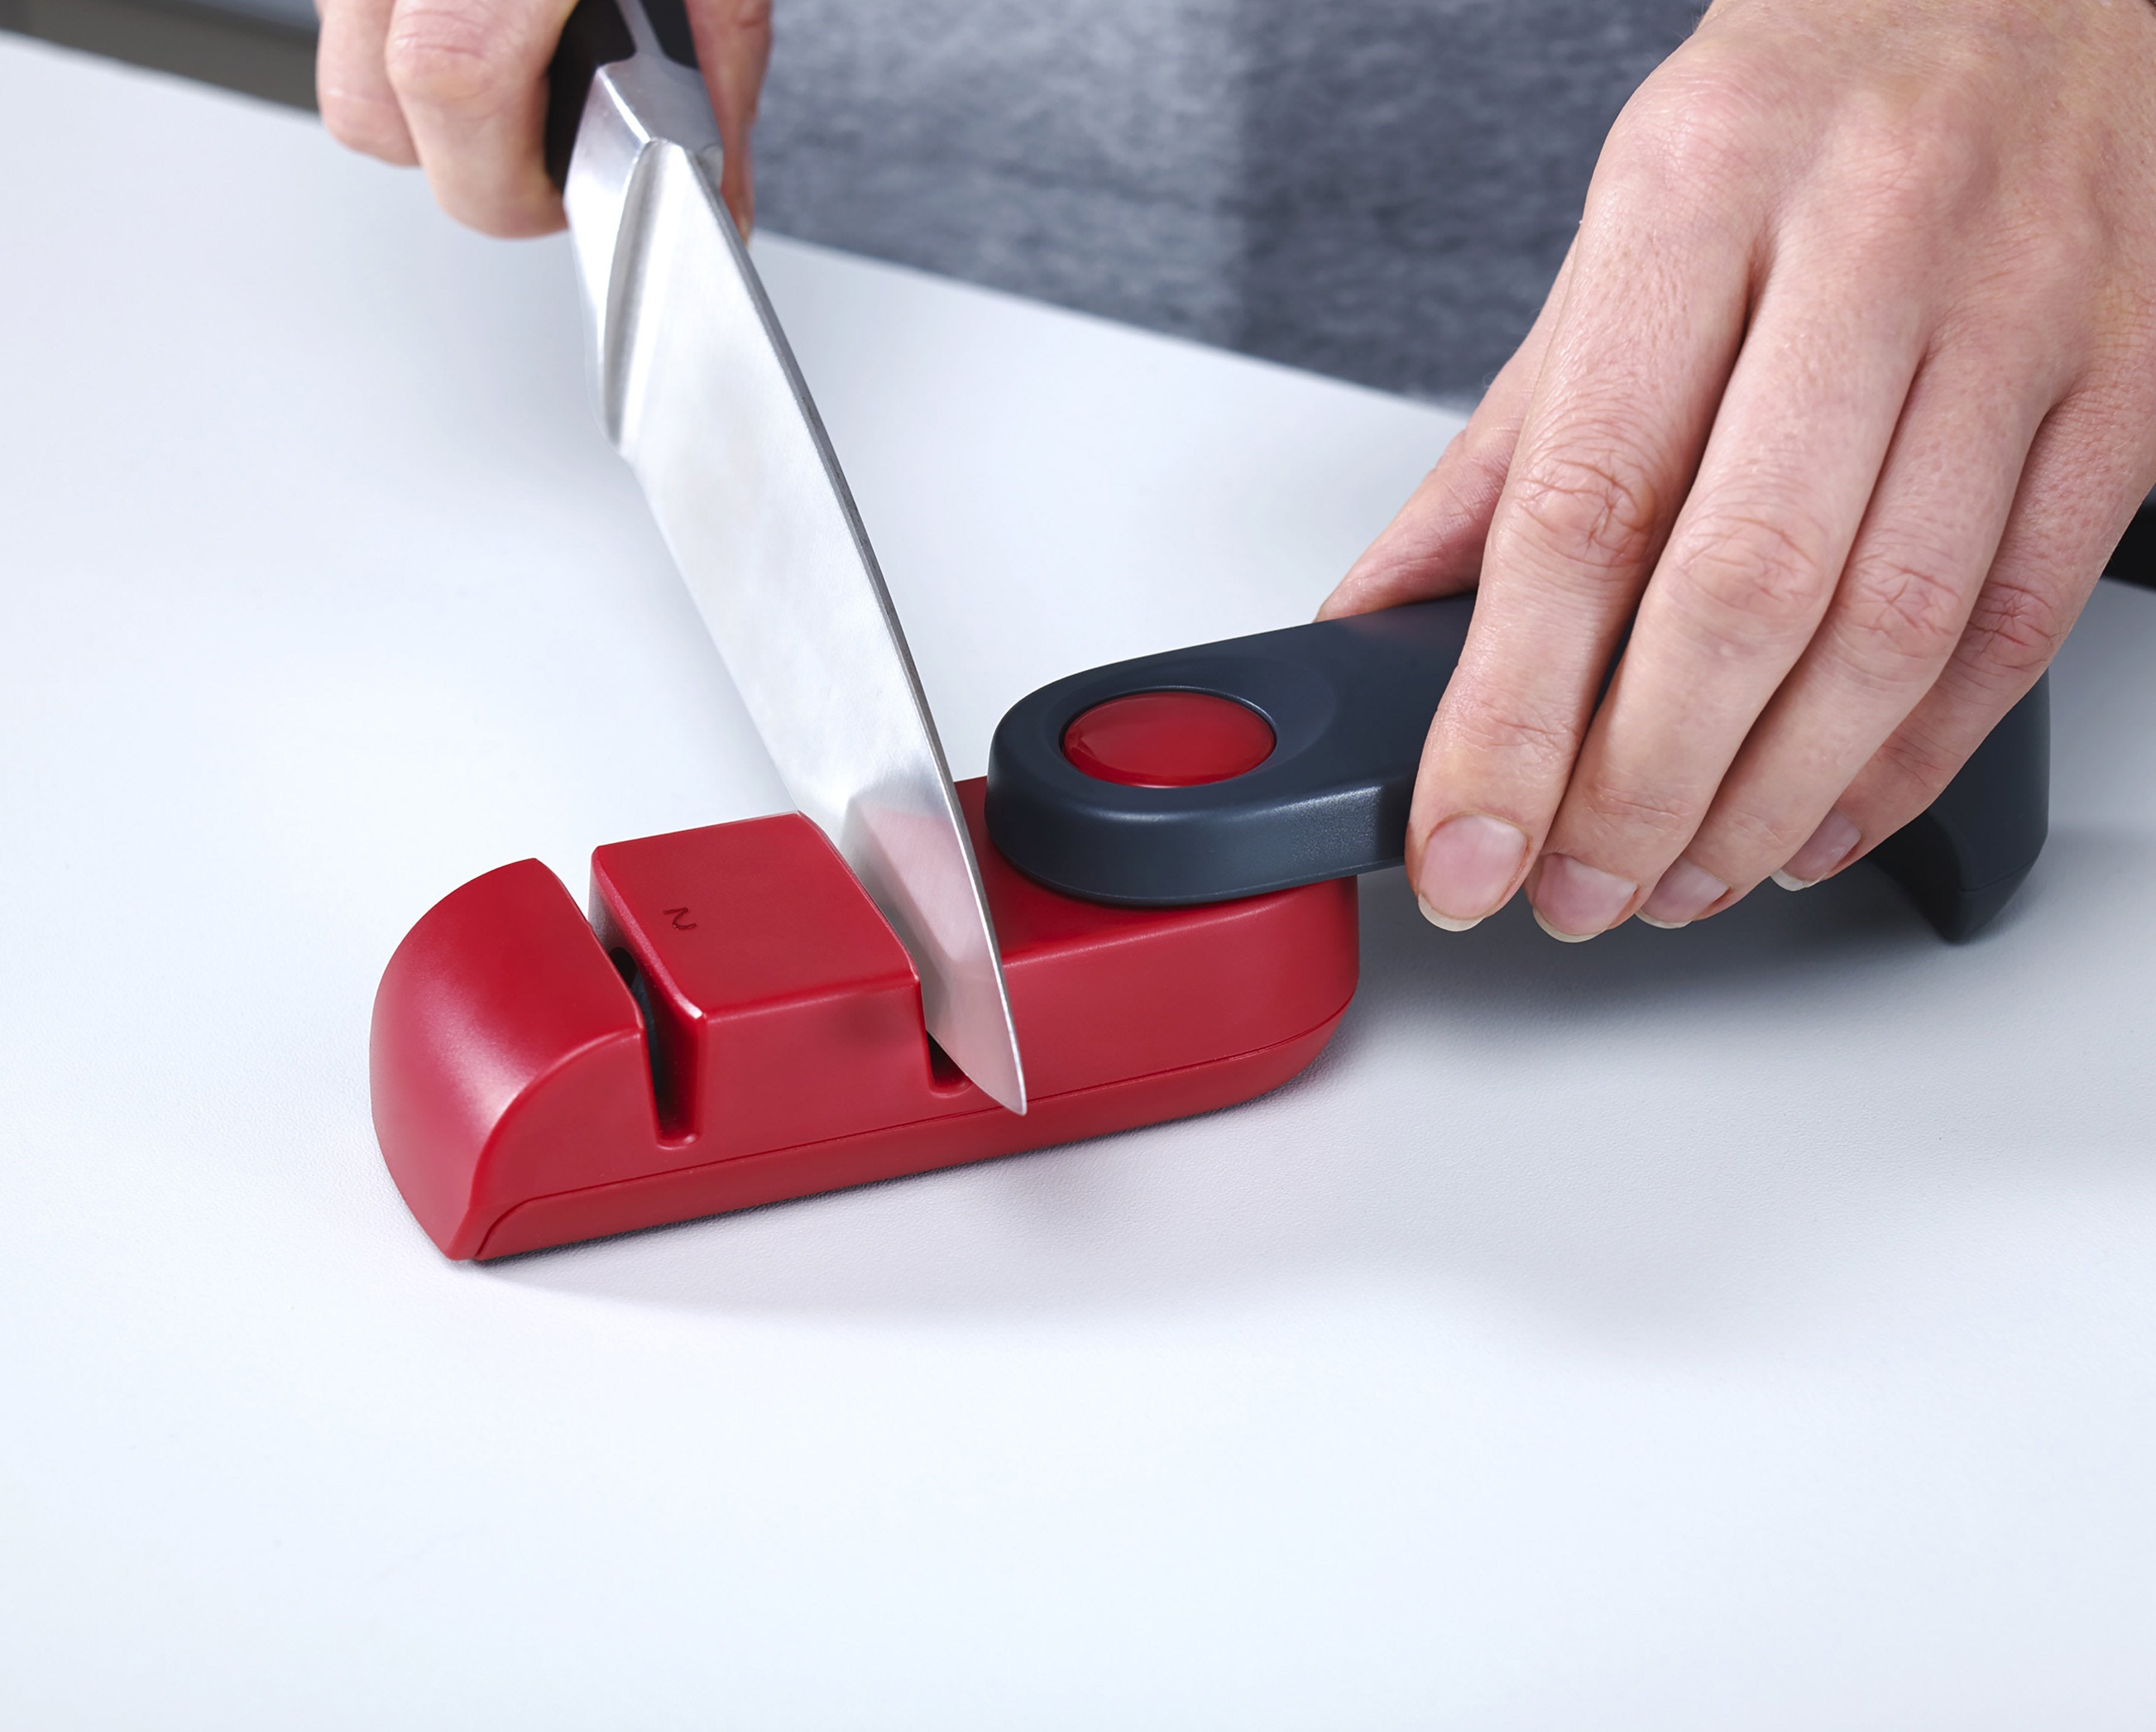 BEON.COM.AU  This stylish rotating knife sharpener can be neatly folded away for compact storage.  Twin ceramic sharpening wheels; course and fine Easy-grip handle and non-slip feet for added stability when sharpening Locks closed for compact storage Unique swivelling design  Specifications Care & use:  ... Joseph Joseph at BEON.COM.AU